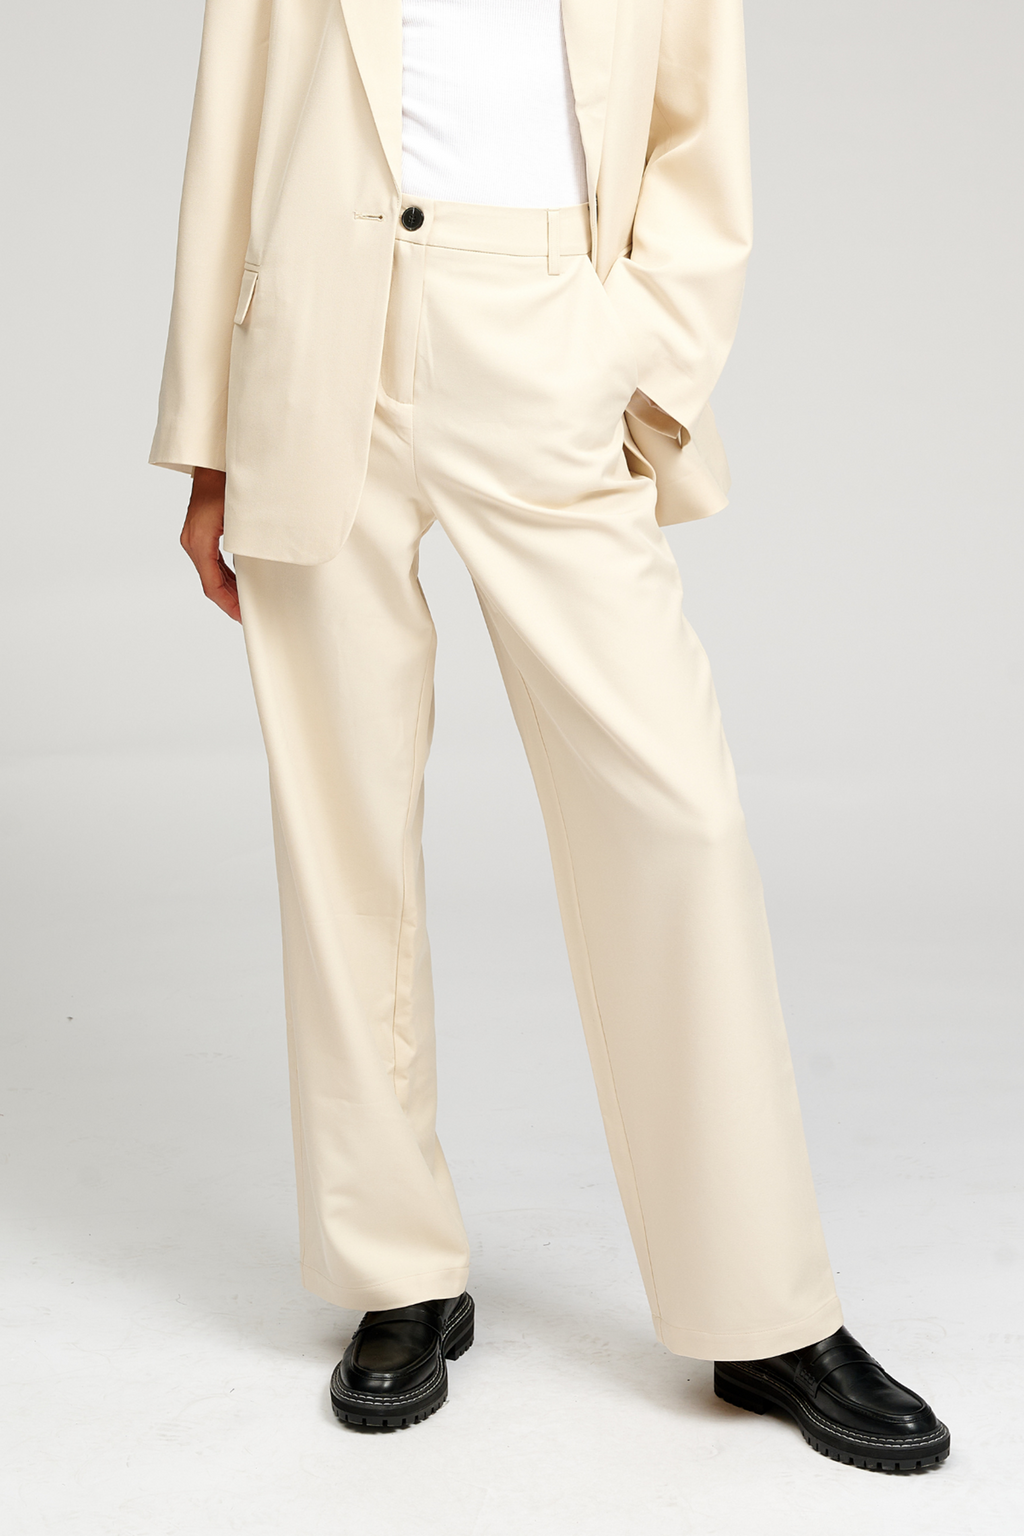 Oversized Blazer with Classic Suit Trousers - Package Deal (Beige)